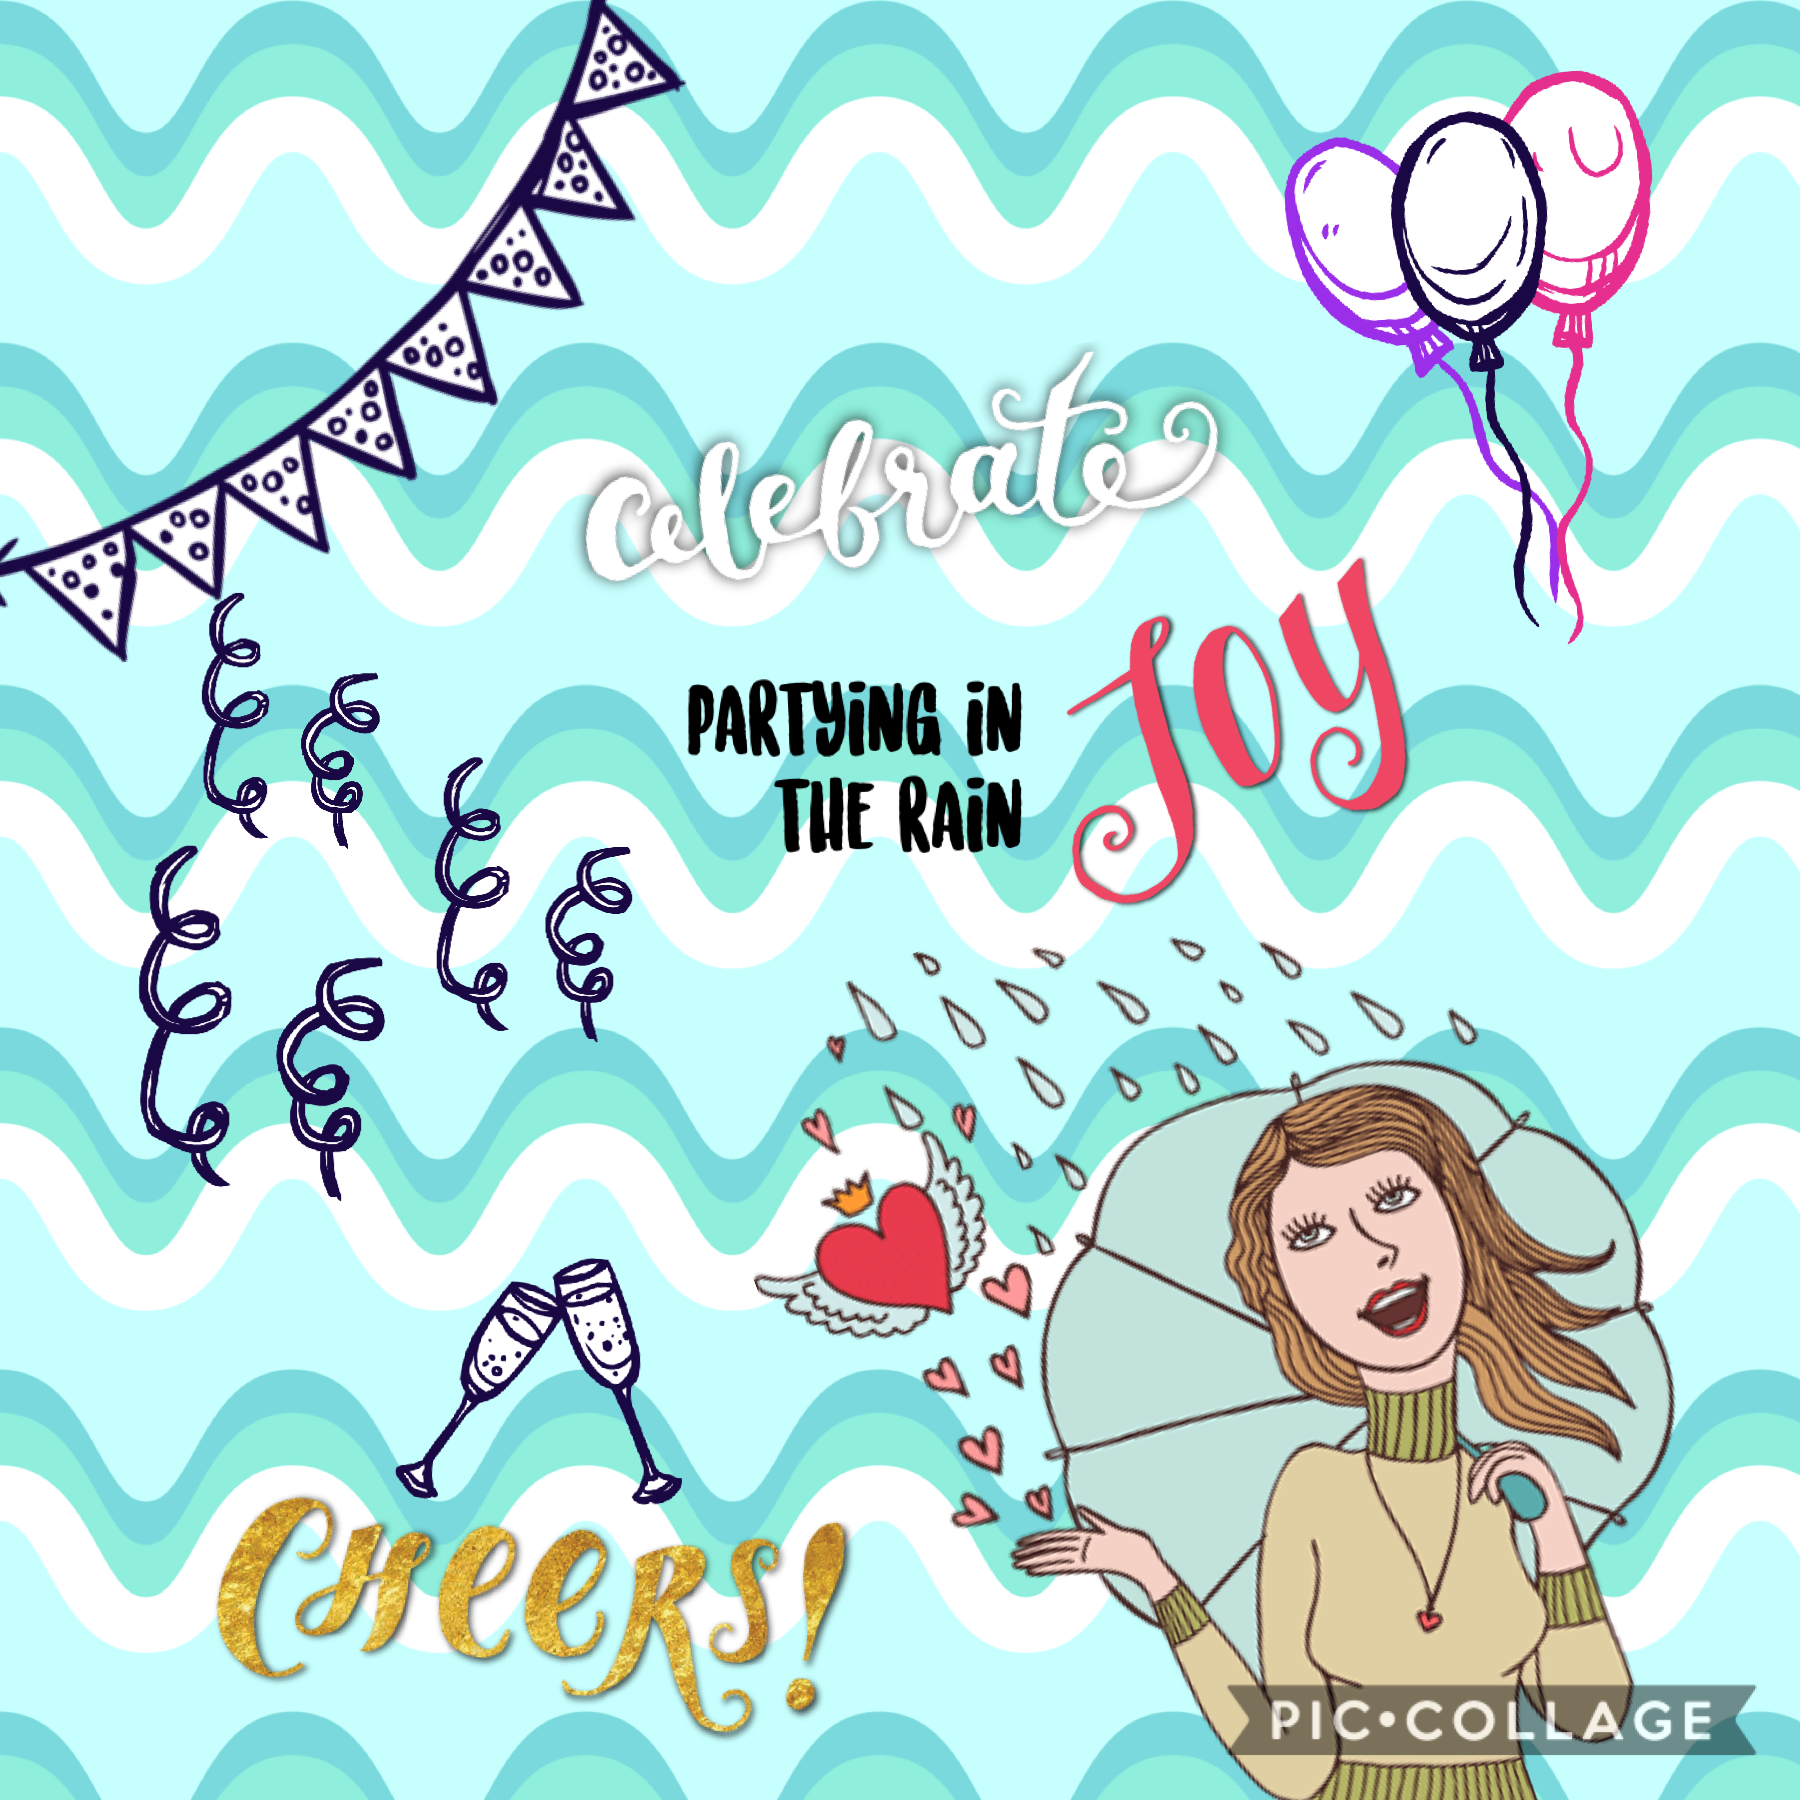 ❤️TAP❤️
Its been raining lately and I couldn’t have picnics and fun activities out side so I made this.